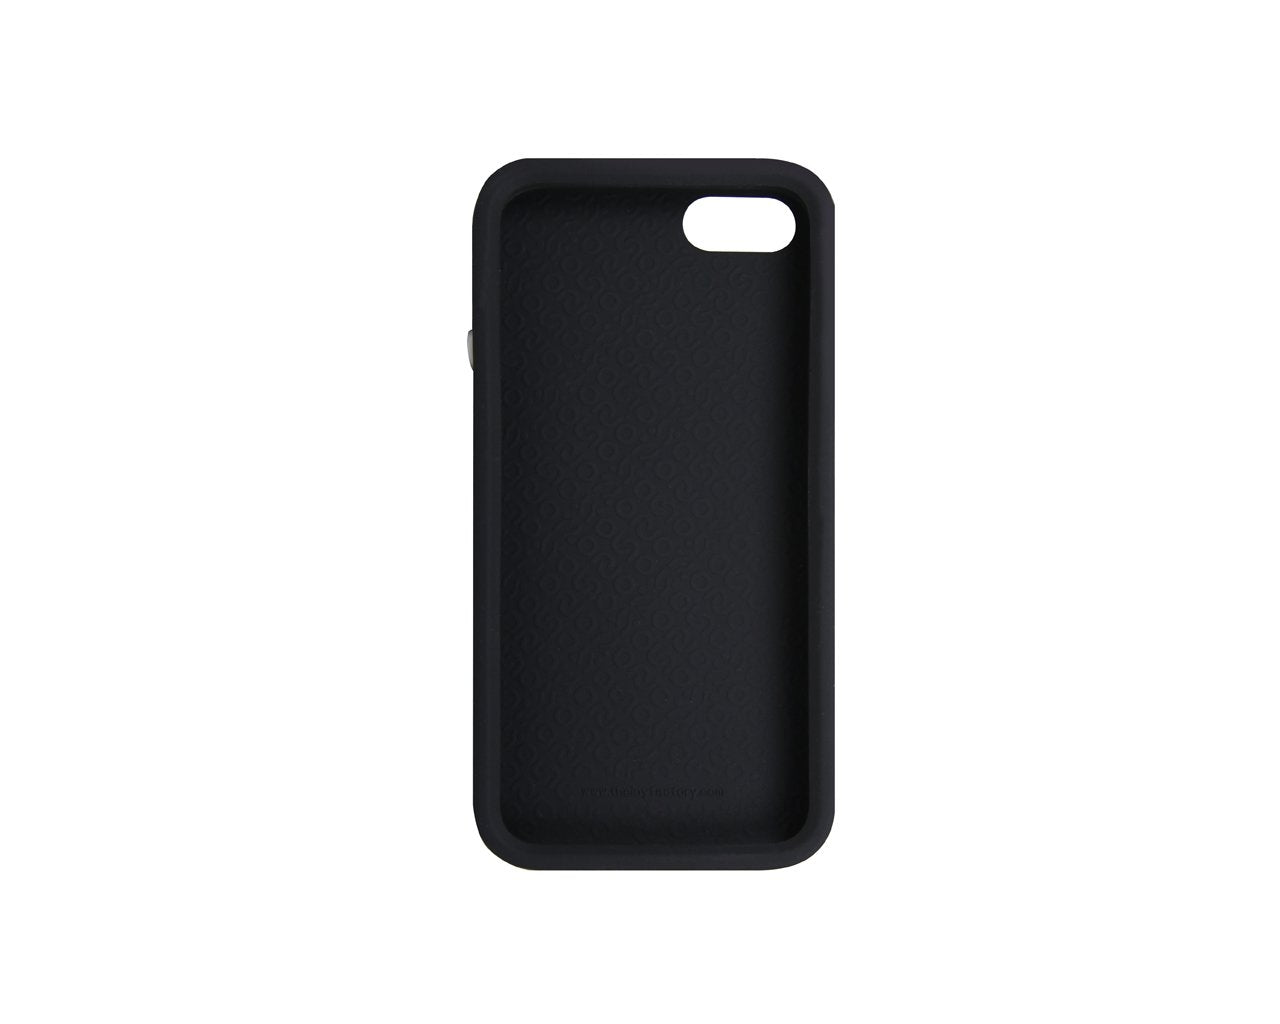 The Joy Factory Jugar Soft Silicone Case with Metal Frame for iPhone5/5S, CSD104 (Matte Black)